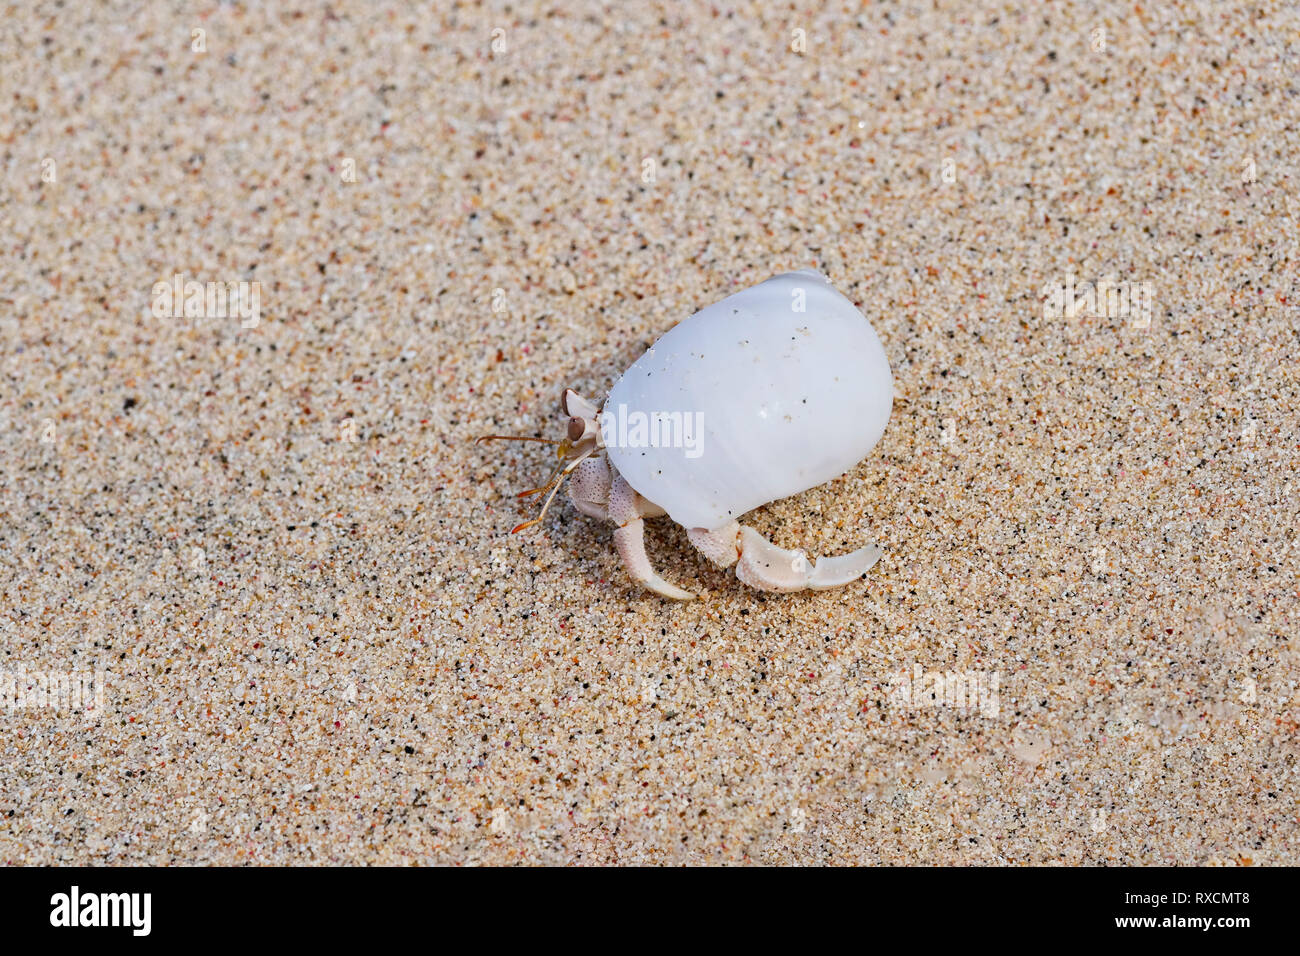 A small Hermit Crab in a white seashell walking on a beach. Close up image Stock Photo